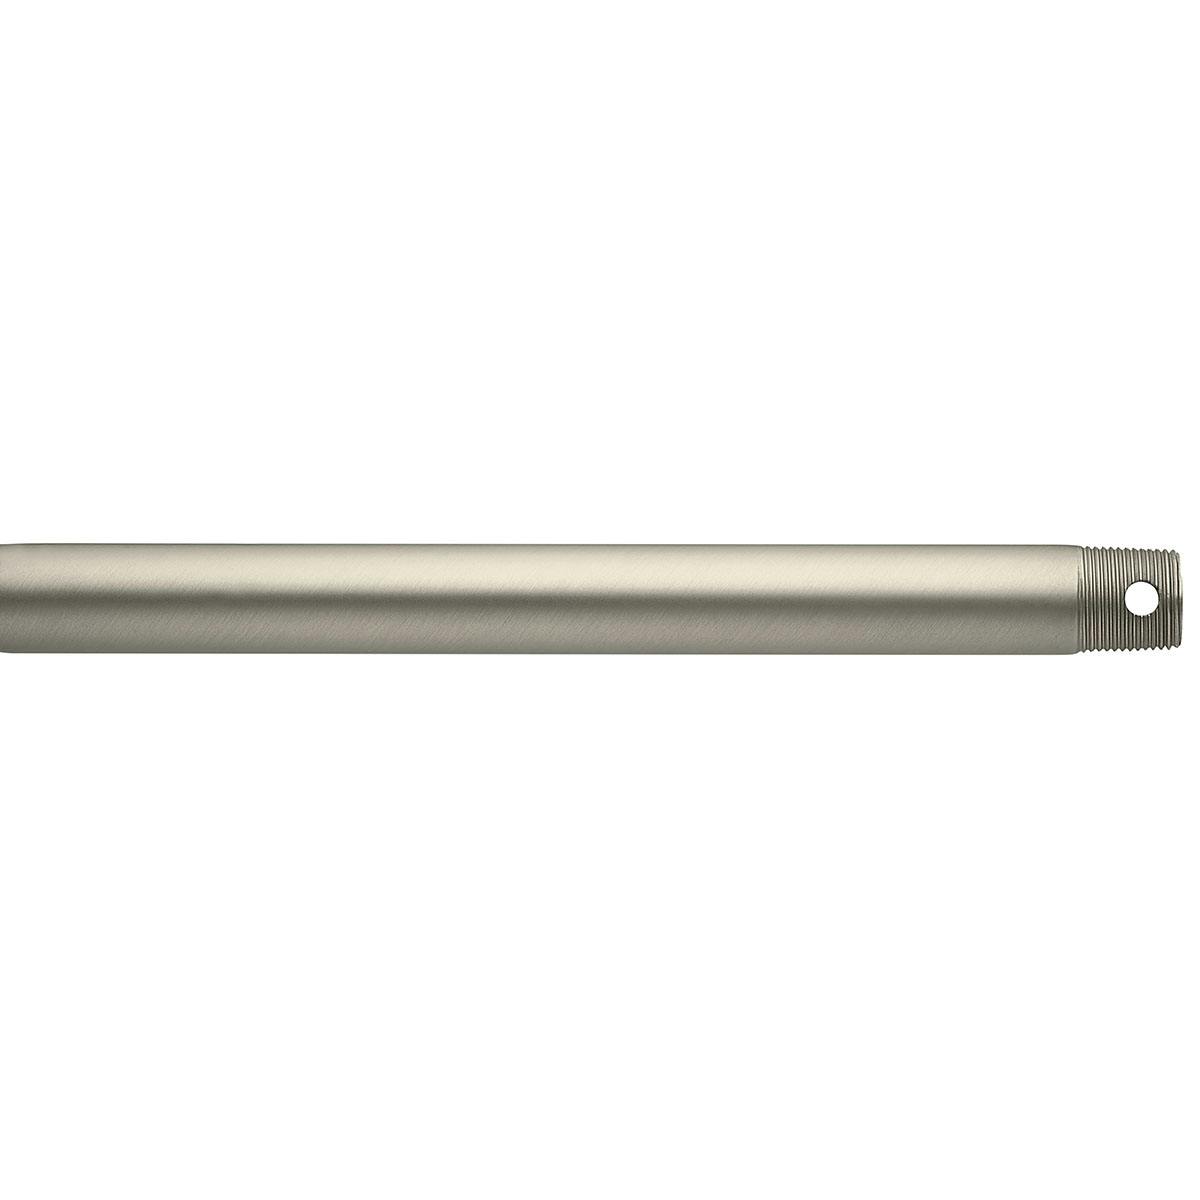 Dual Threaded 24" Downrod Brushed Nickel on a white background